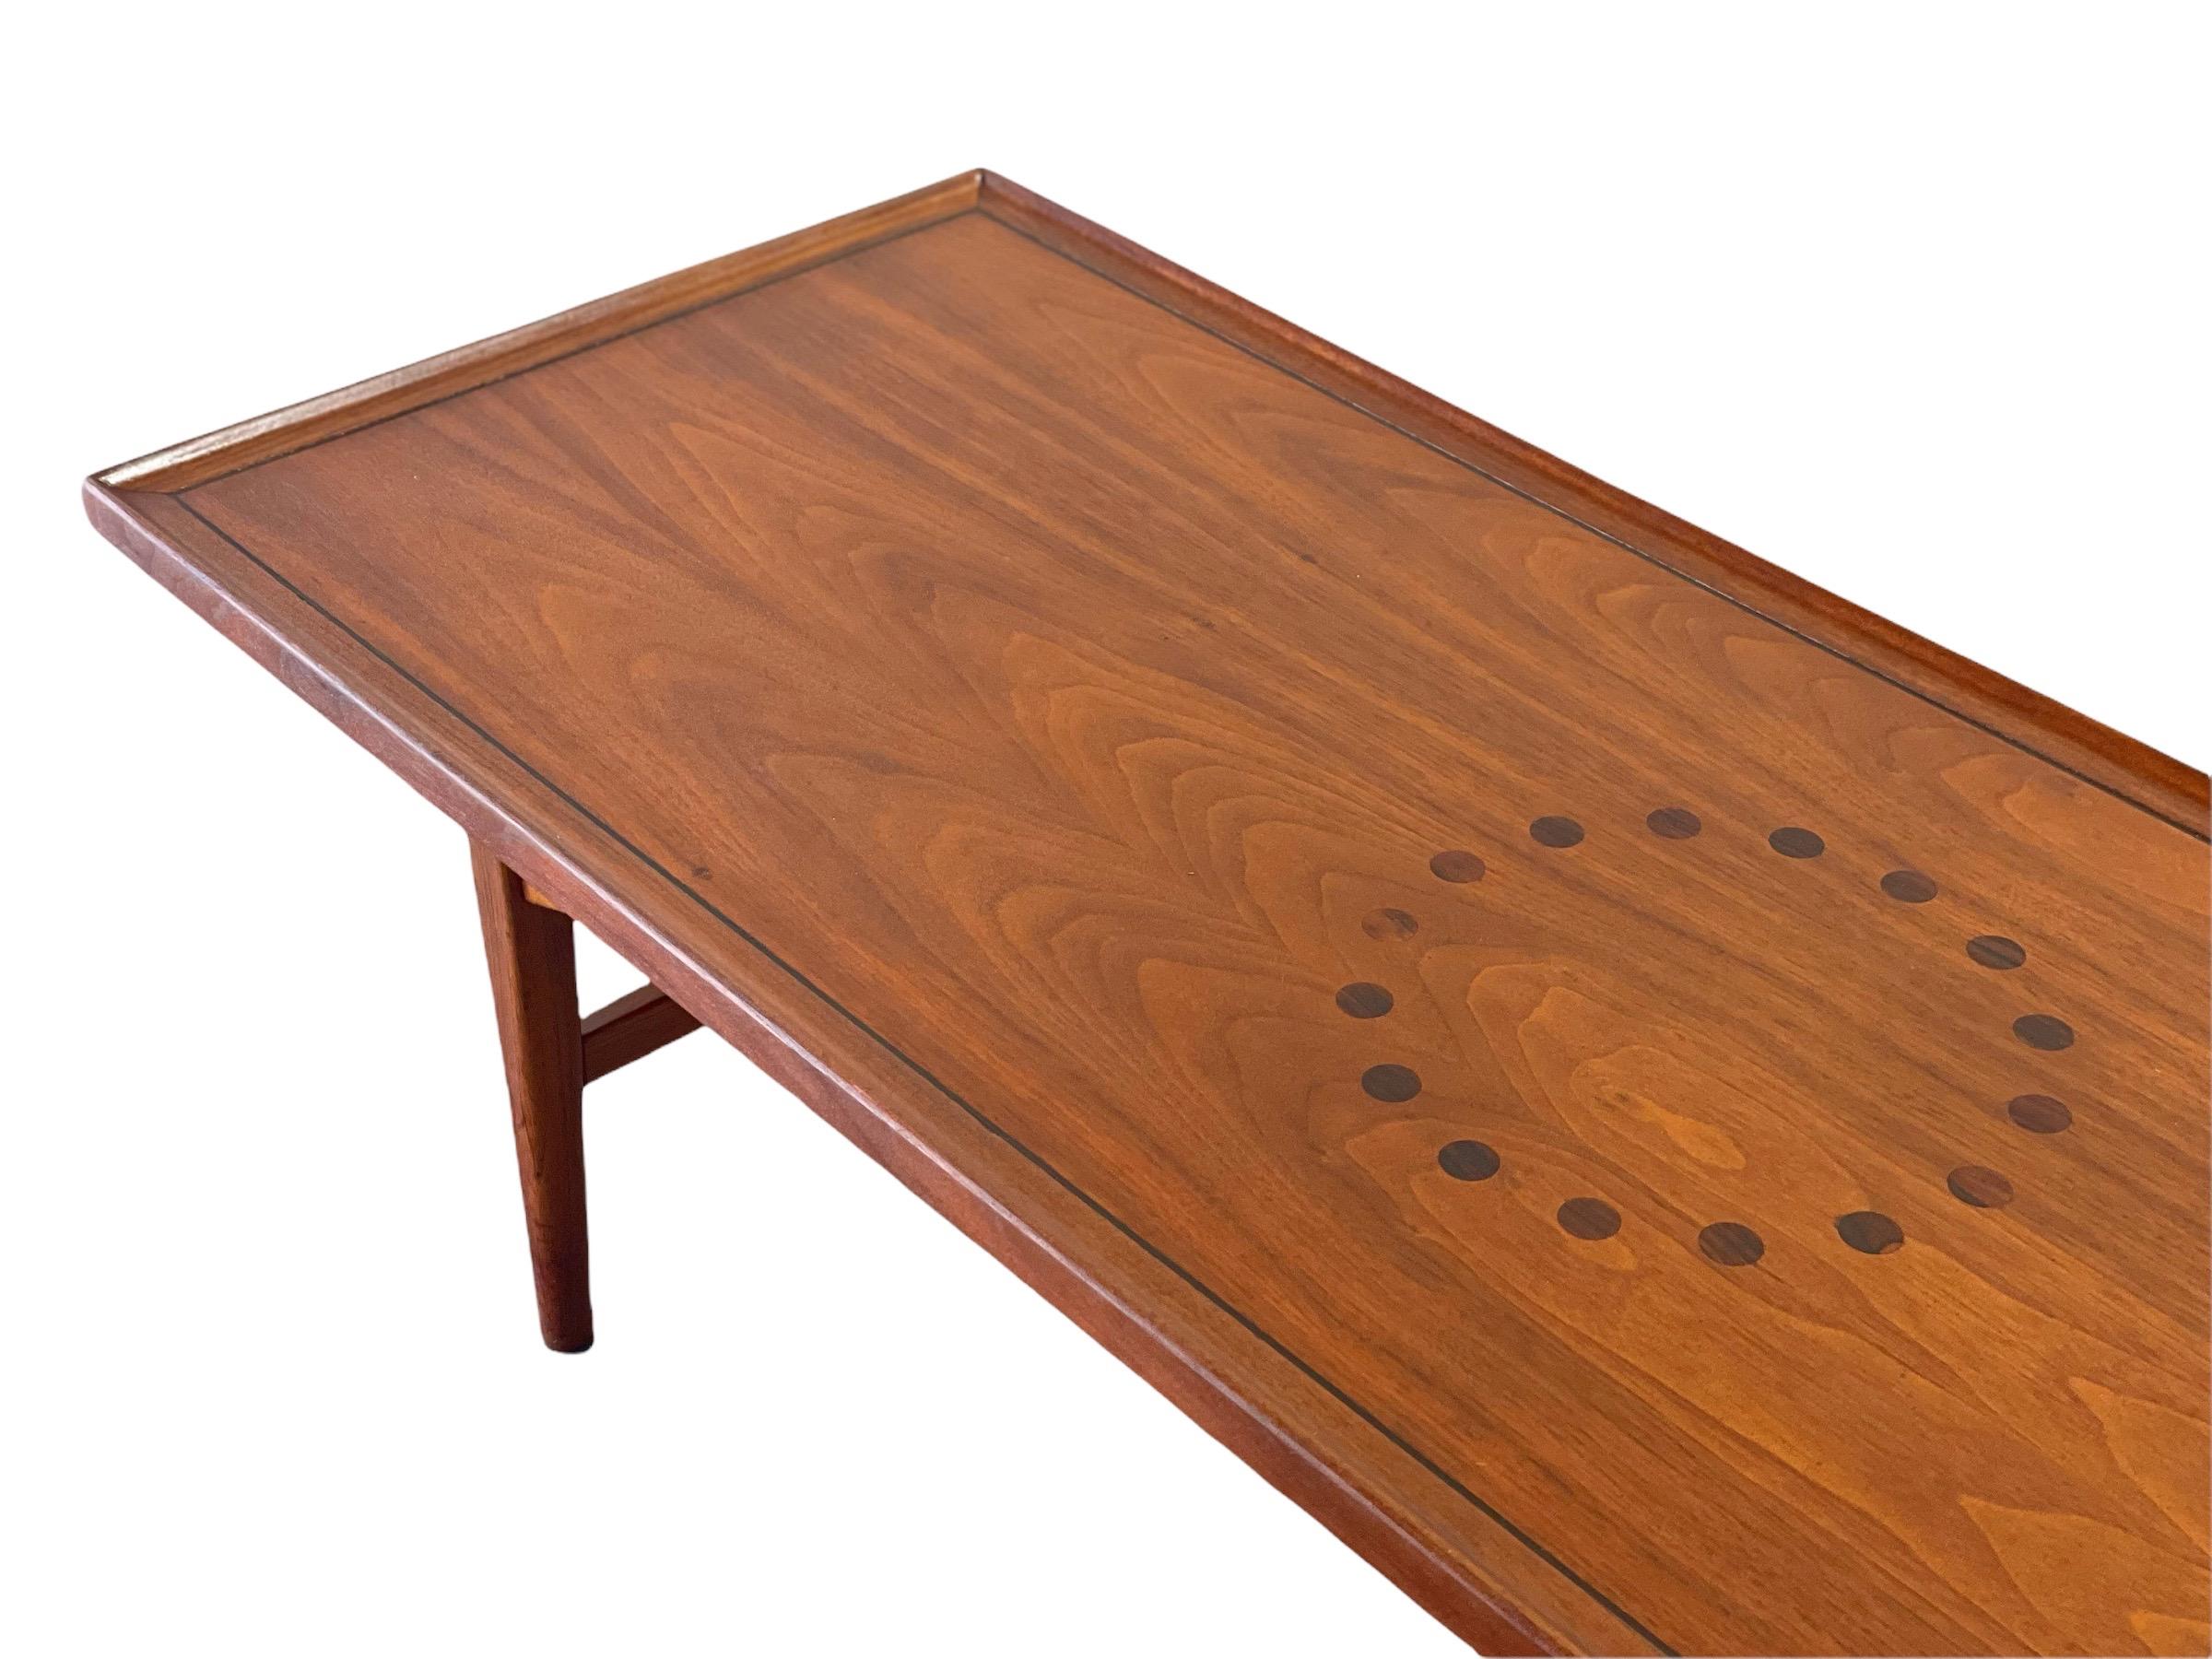 Mid-Century Modern Declaration cocktail table by Kipp Stewart and Stewart MacDougall for Drexel. Surfboard style - constructed of American walnut with a Brazilian rosewood inlay. Subtle, modern and timeless. Danish modern style with stout and sturdy